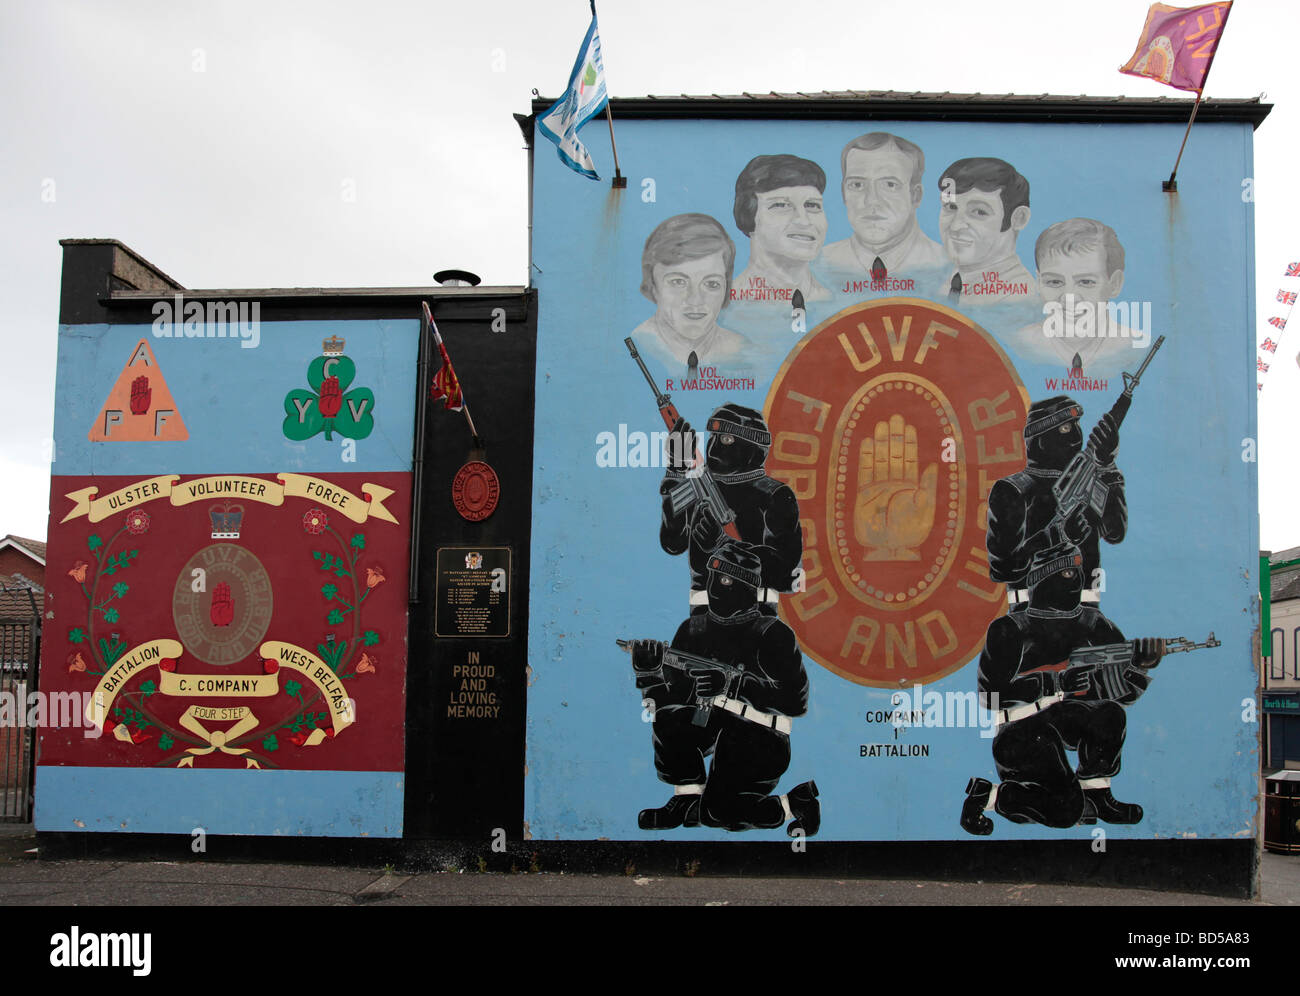 Mural in the Loyalist area of West Belfast showing the UVF, with hooded paramilitaries and portraits of  five UVF members Stock Photo